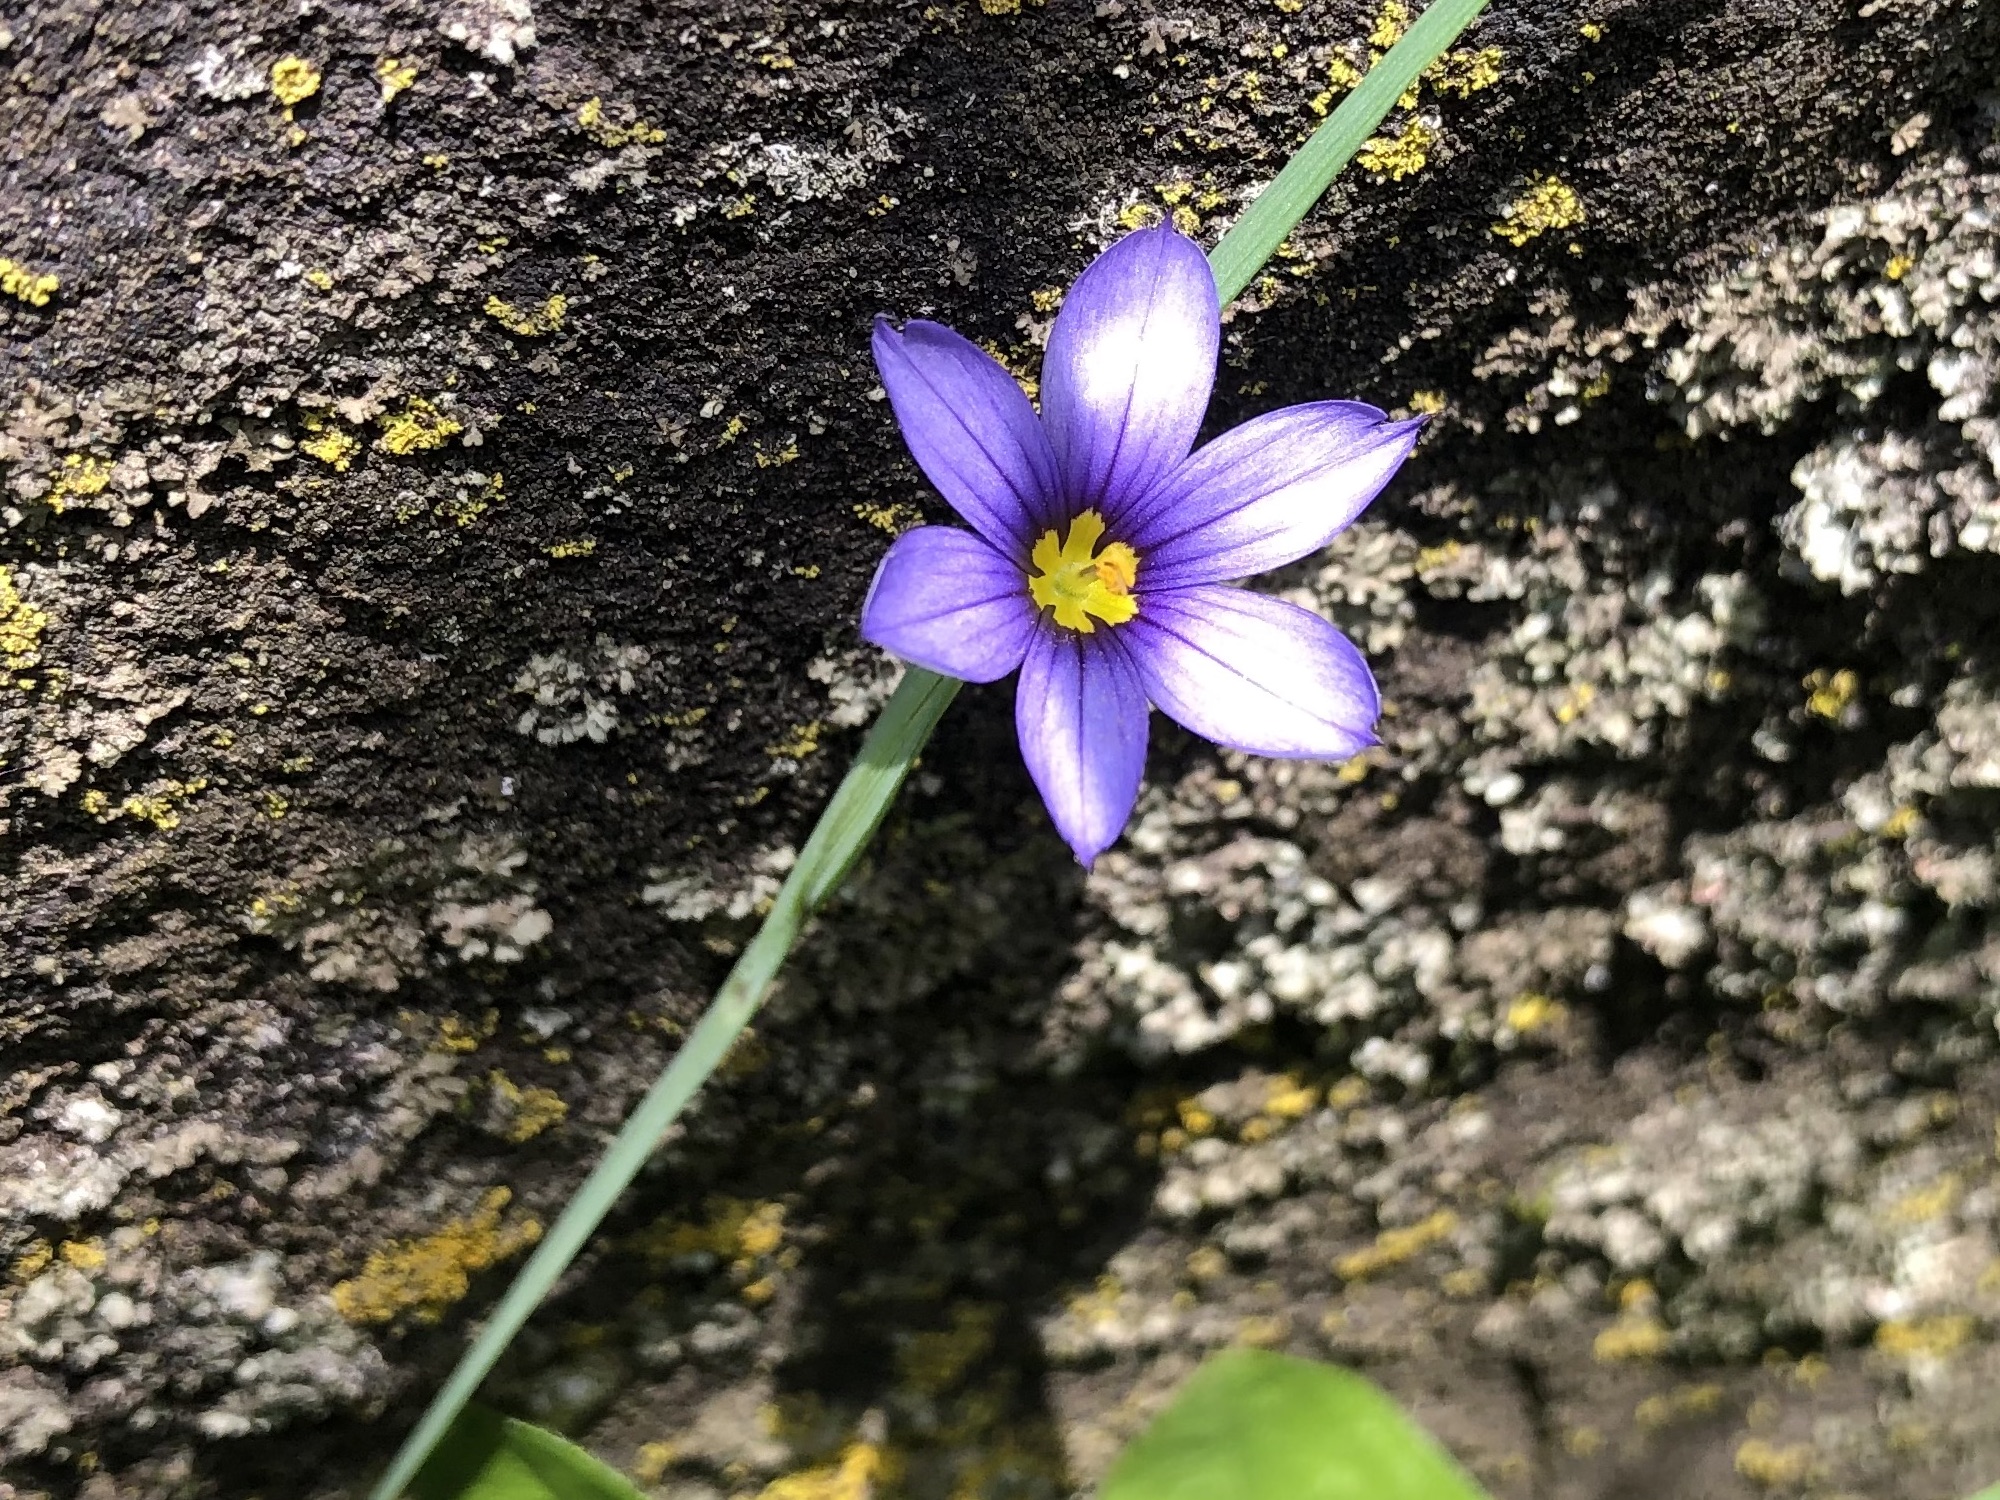 Blue-eyed Grass growing by stone wall  by UW Arbortetum Visitors Center in Madison, Wisconsin on May 30, 2022.